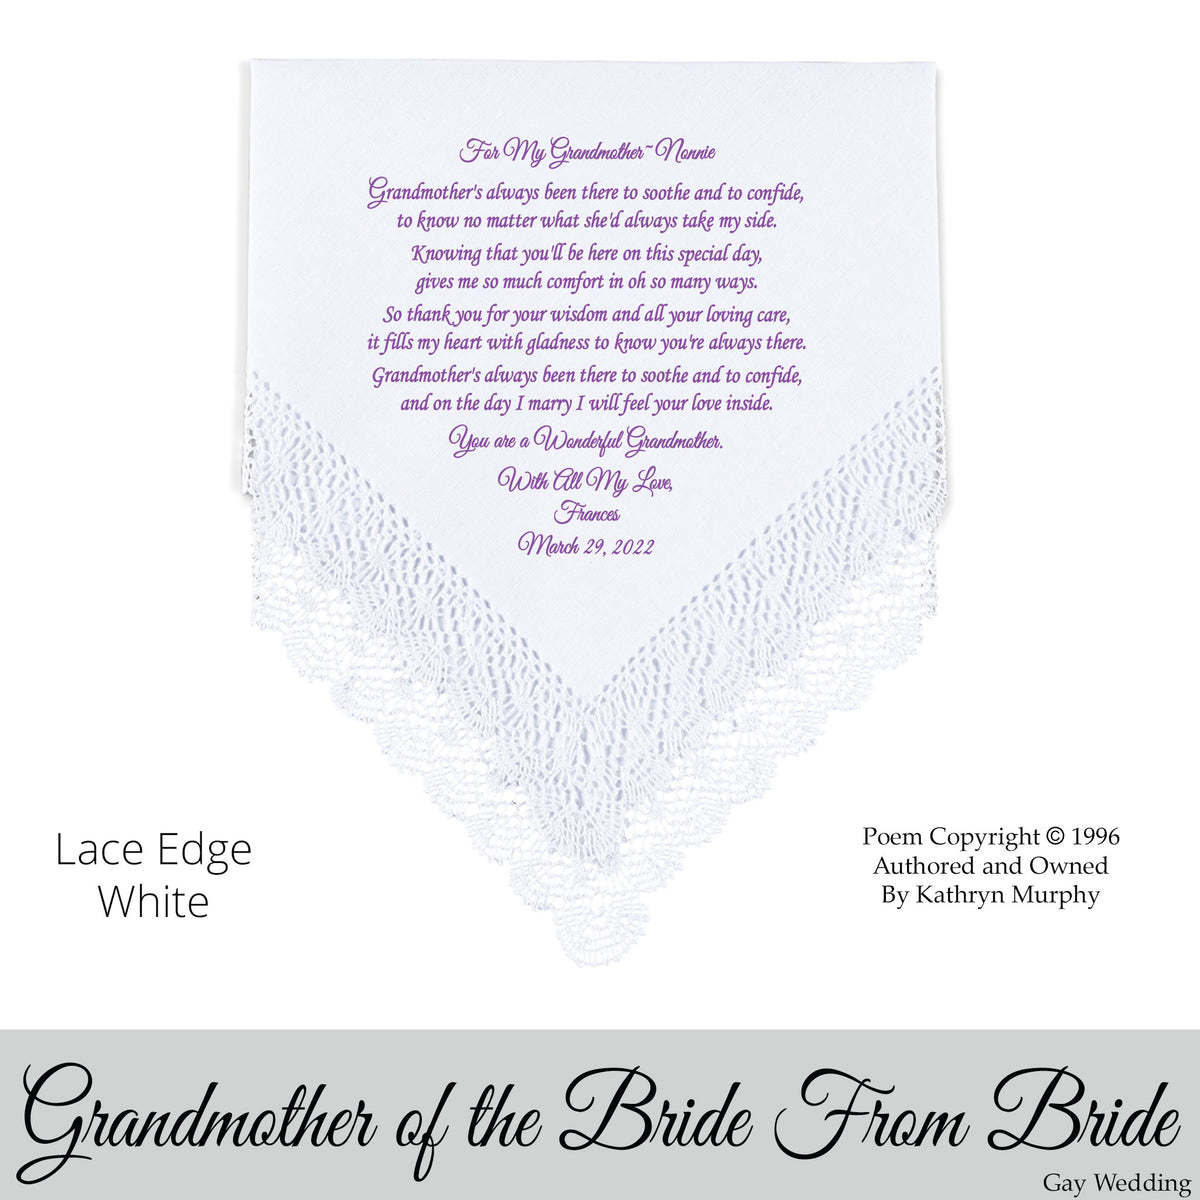 Gay Wedding Gift for the Grandmother of the Bride poem printed wedding hankie